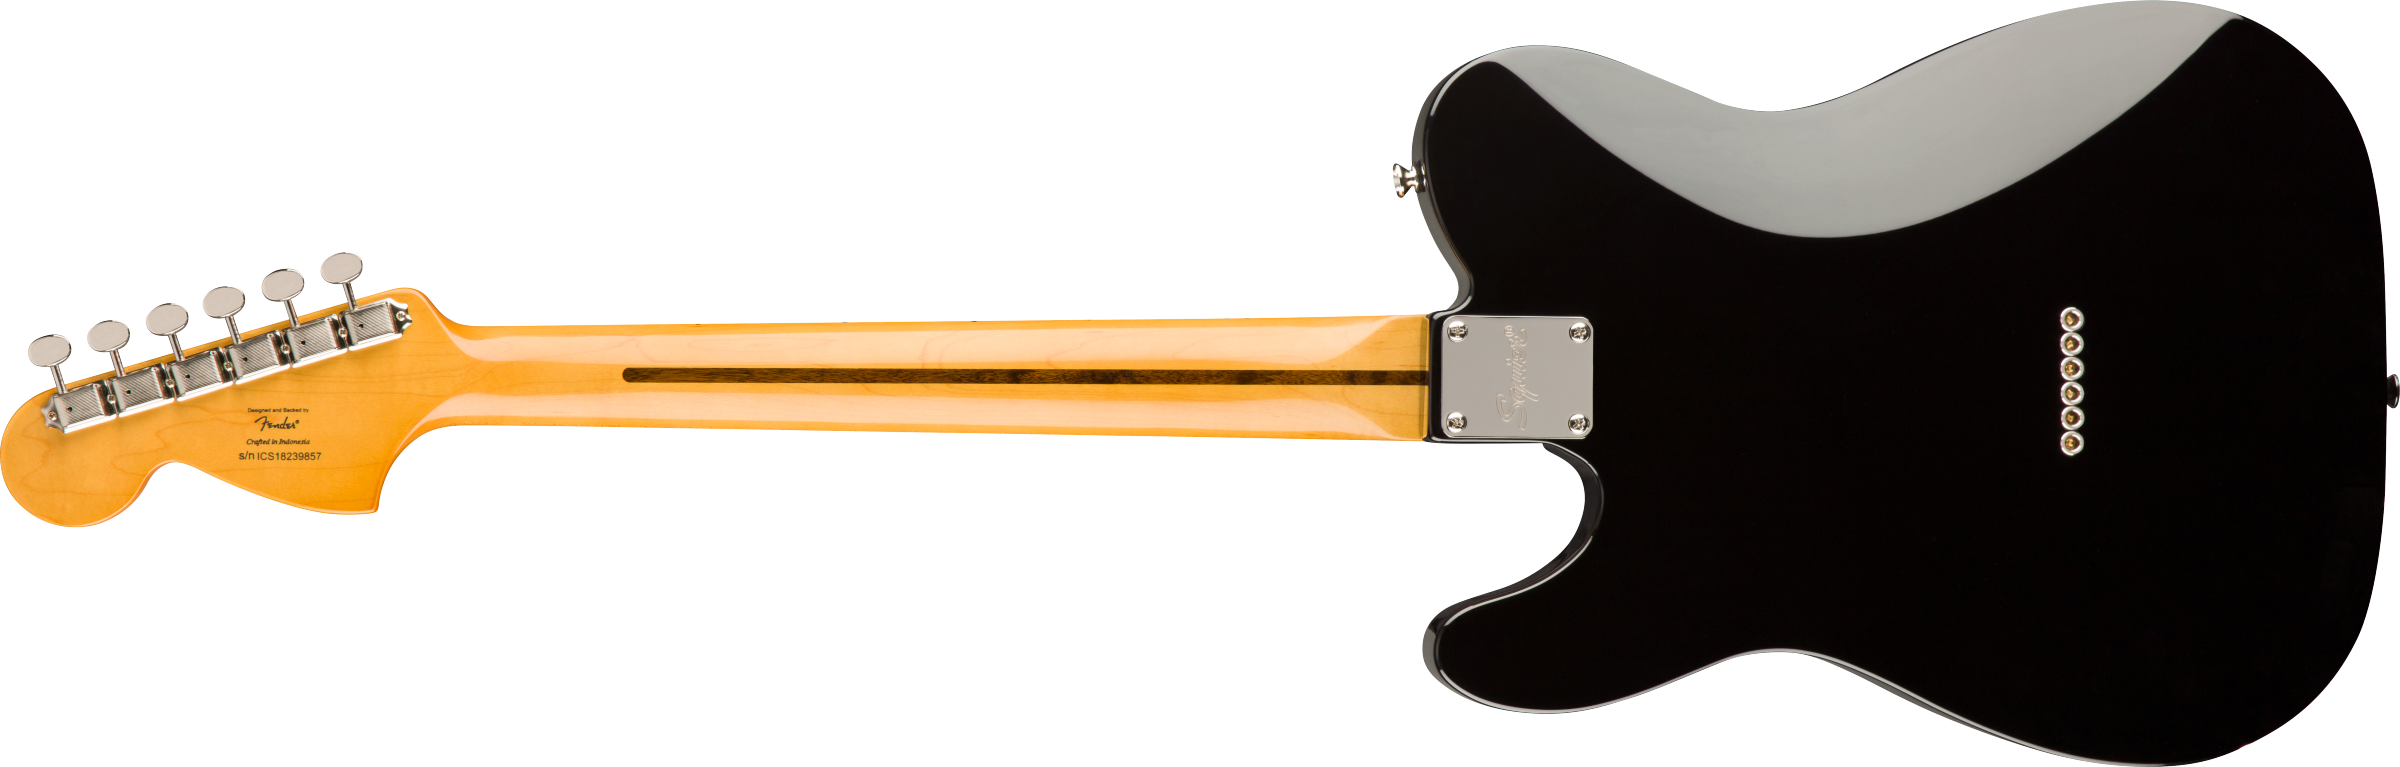 Squier Classic Vibe 70s Telecaster Deluxe, Maple Fingerboard